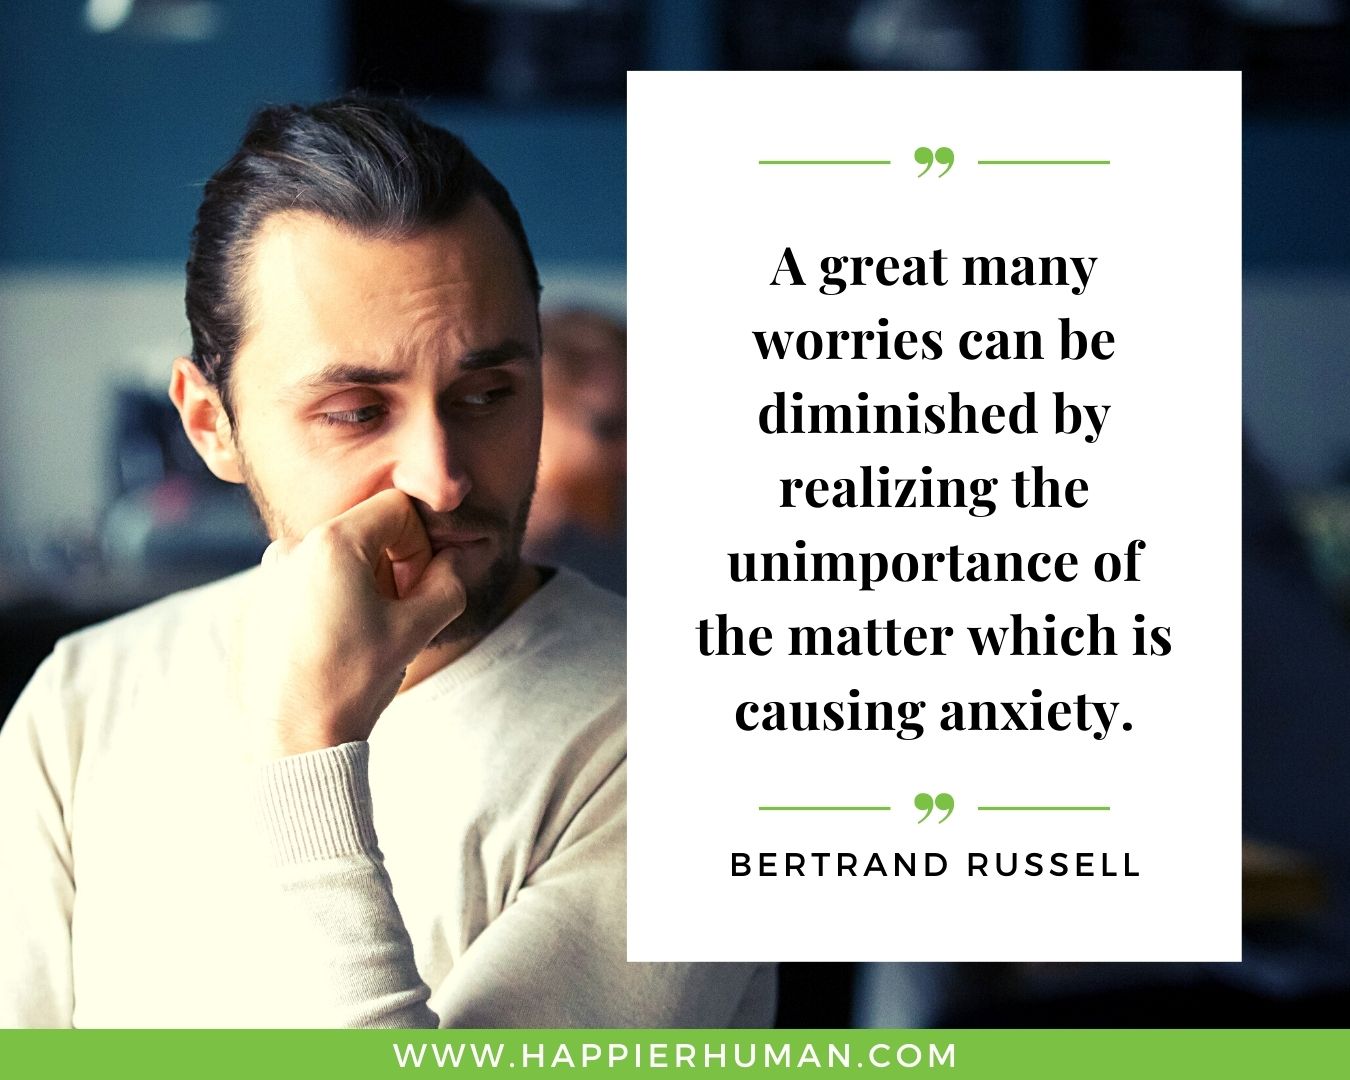 Overthinking Quotes - "A great many worries can be diminished by realizing the unimportance of the matter which is causing anxiety." - Bertrand Russell